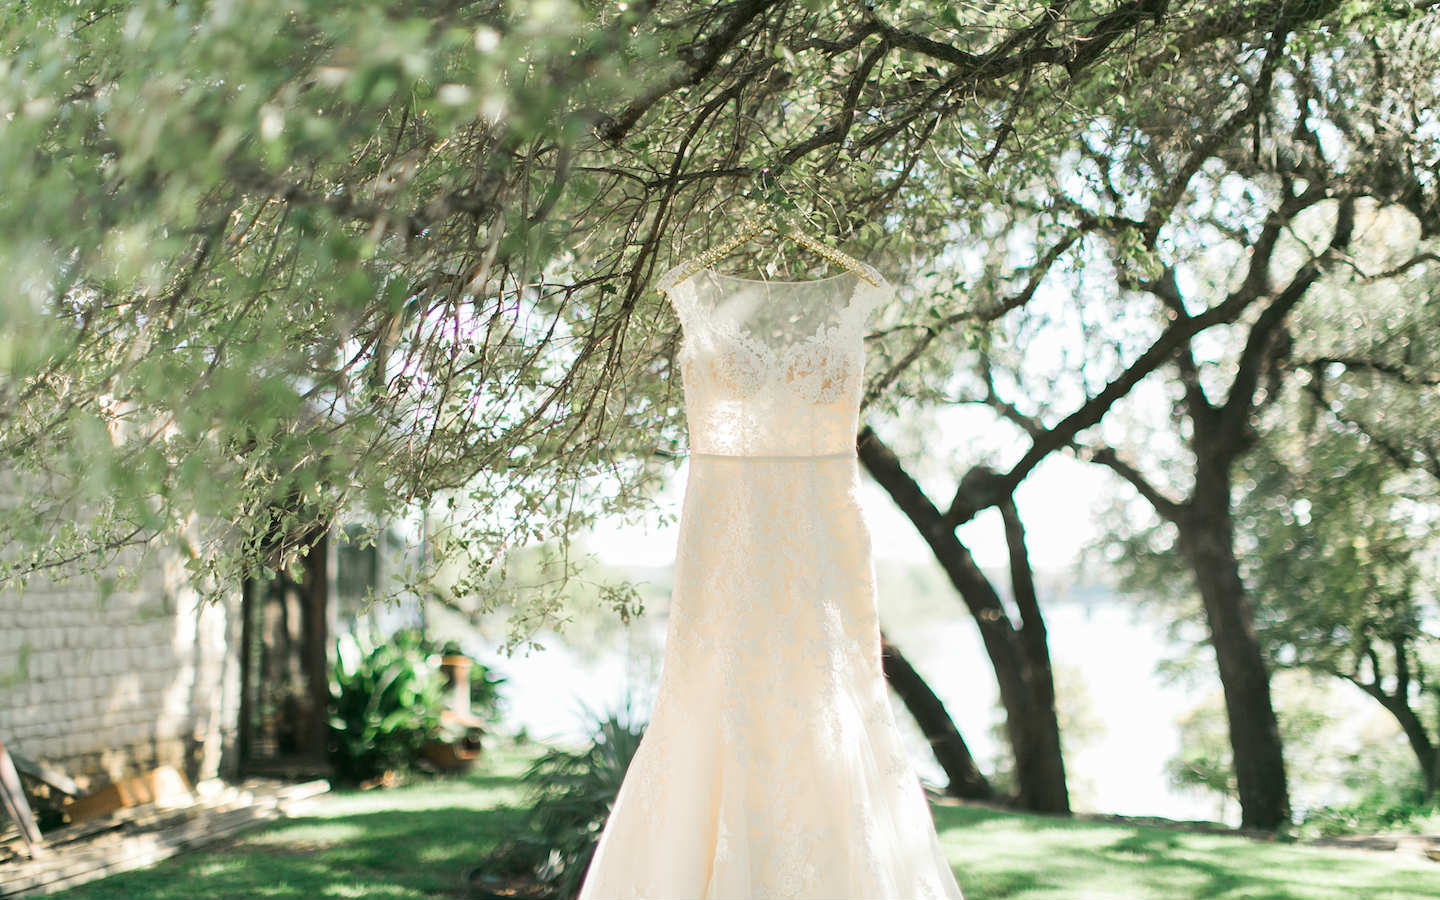 Texas waterfront wedding venues - the dress